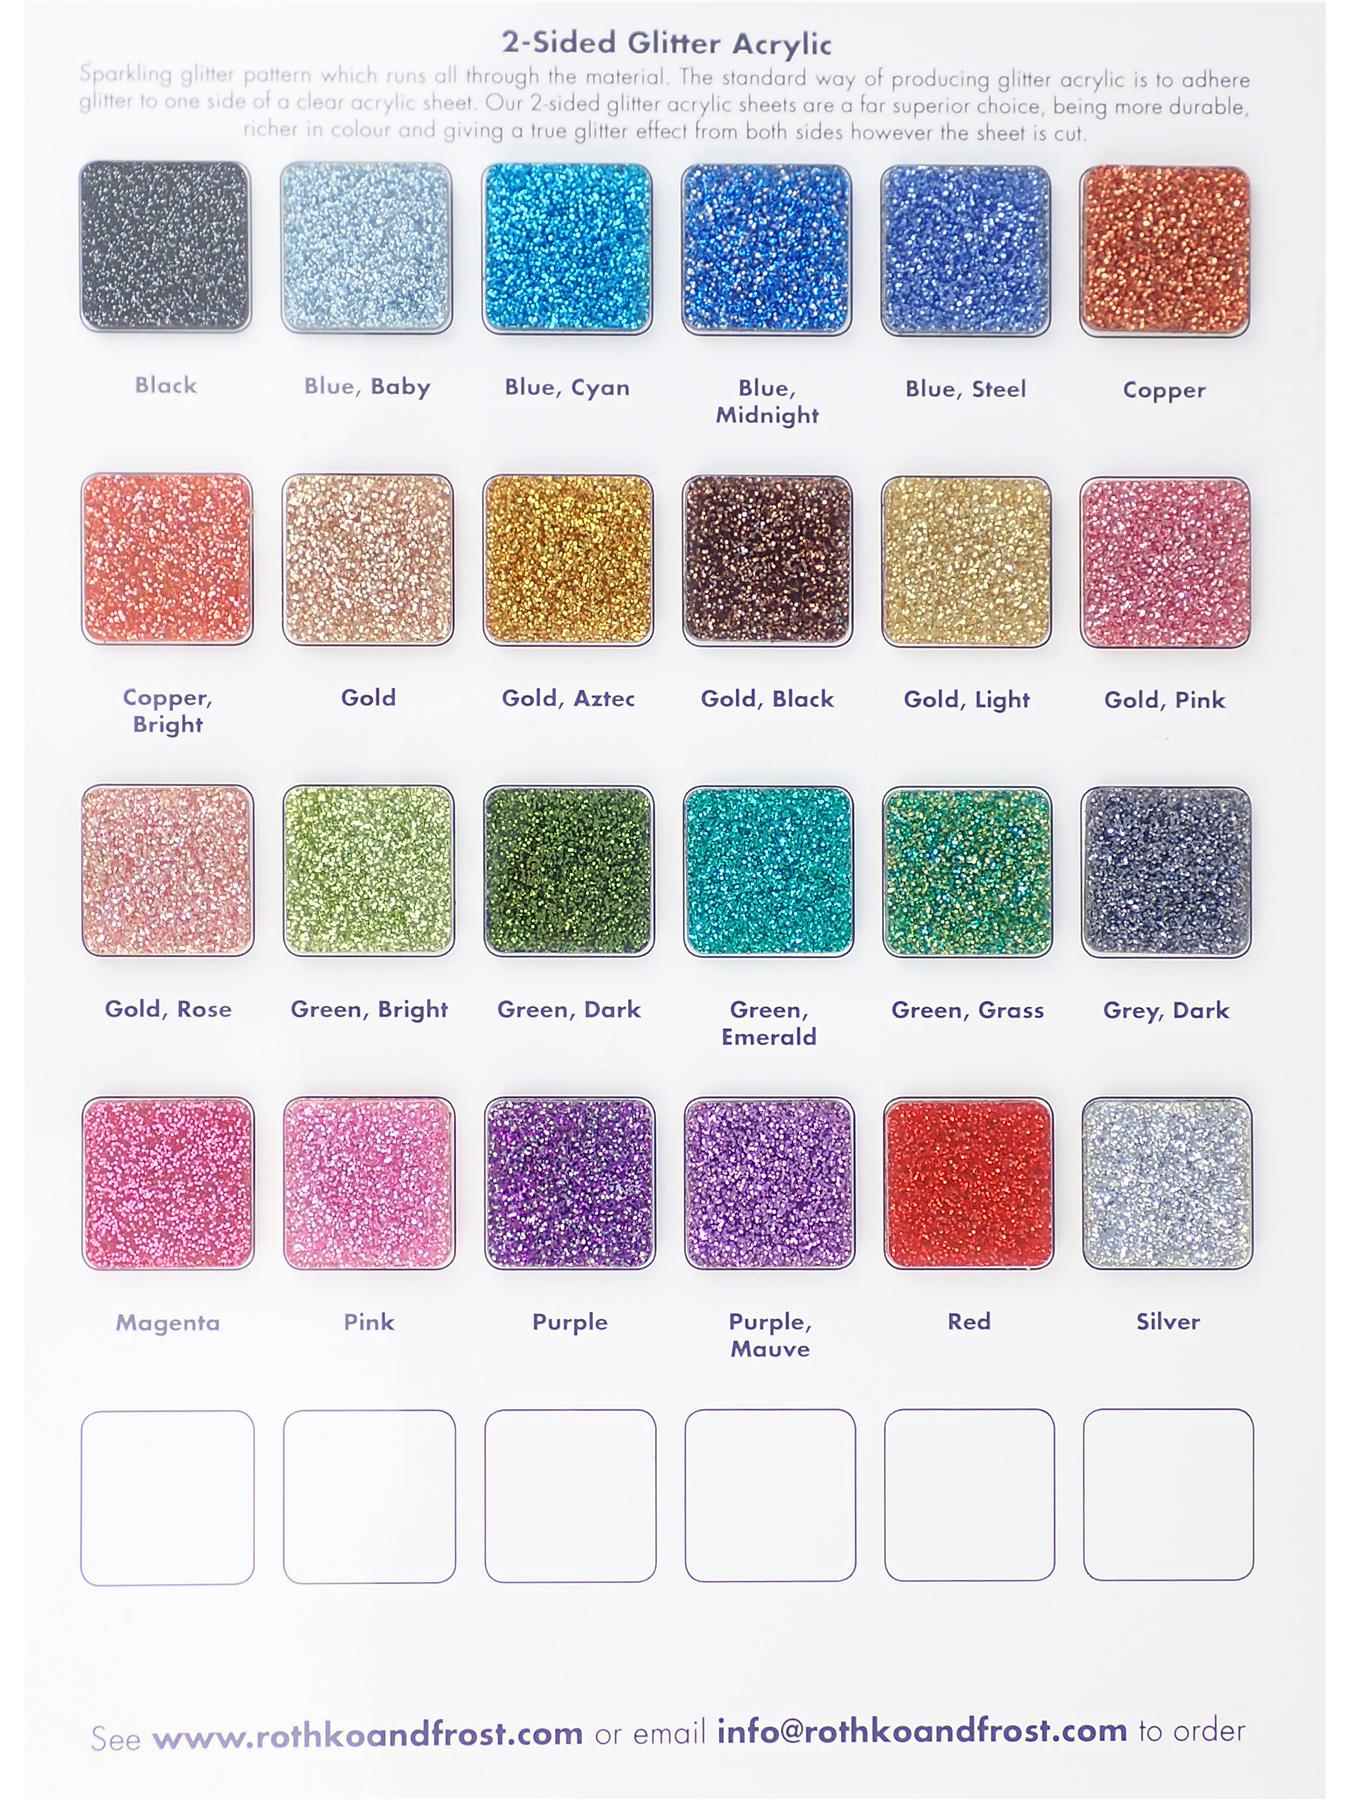 Incudo 2-Sided Glitter Acrylic Swatch Page